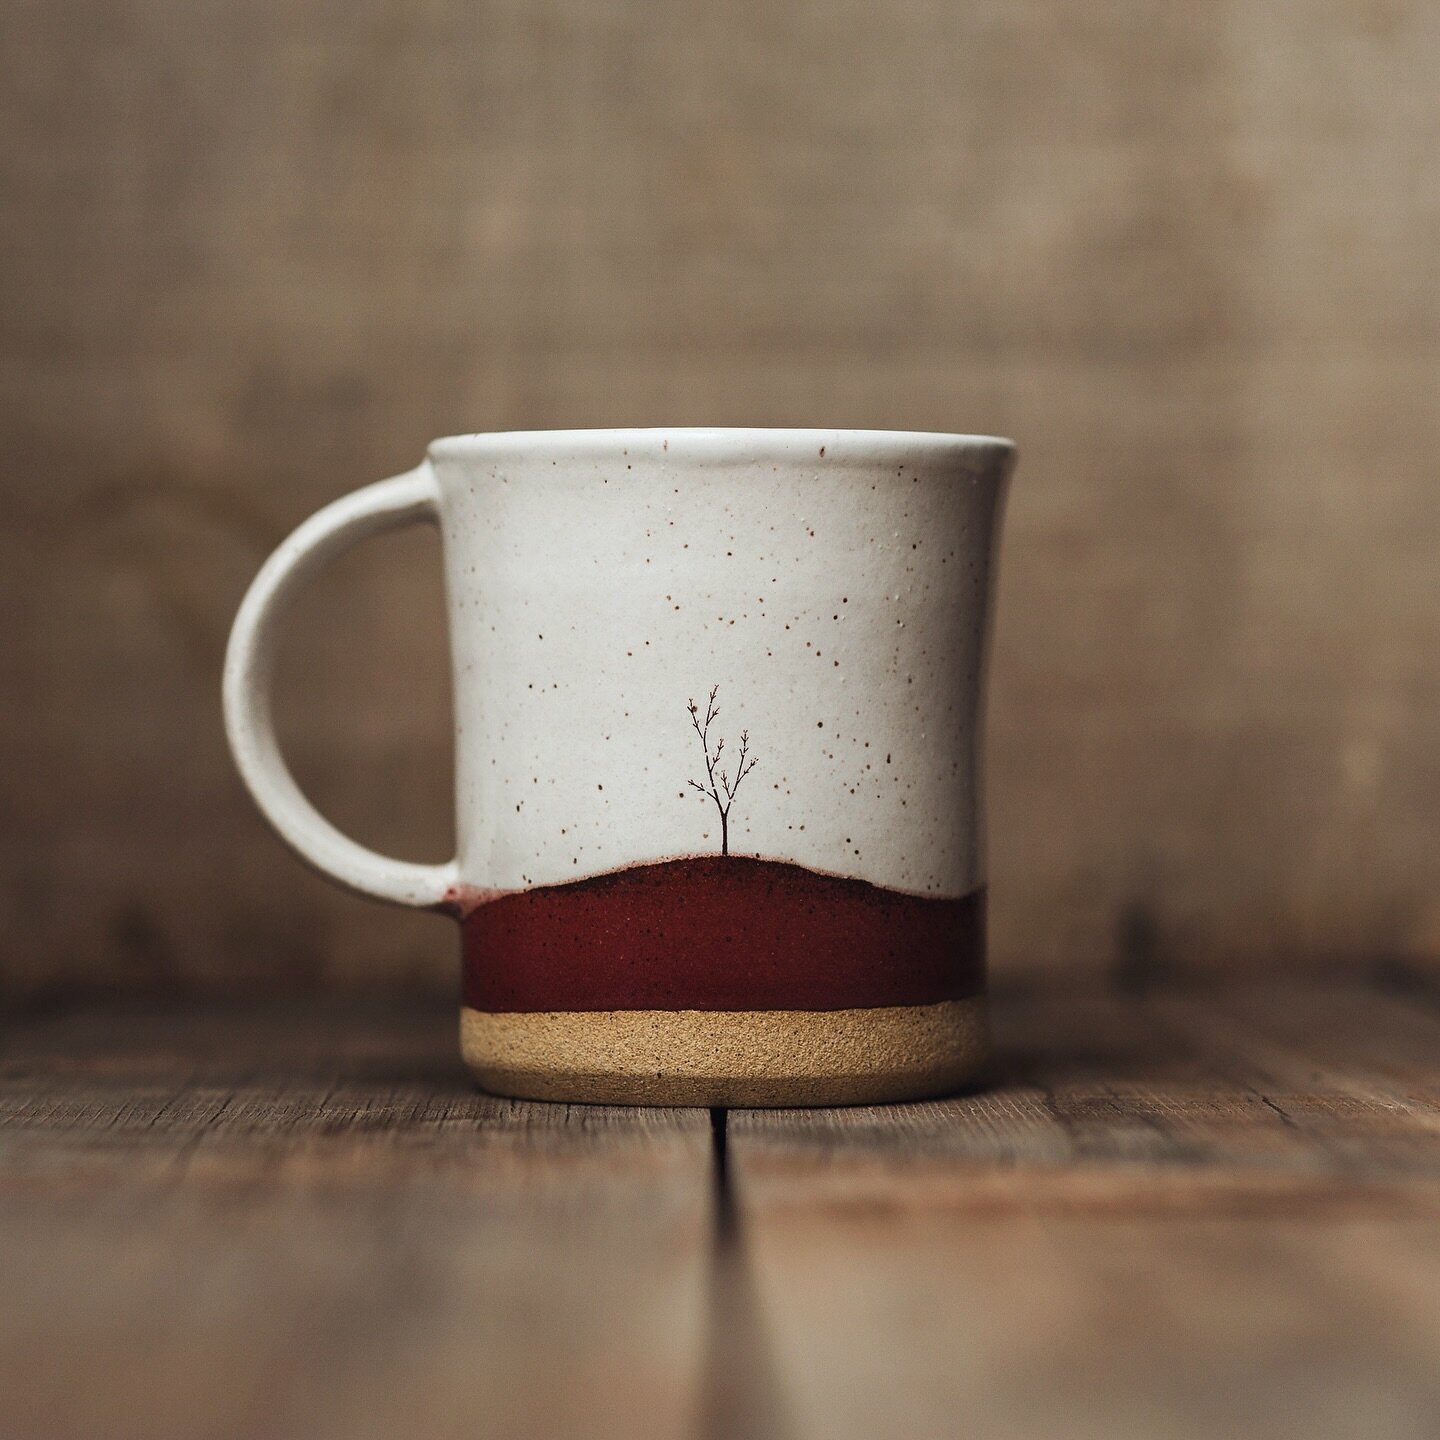 Only Love Can Fill An Empty Cup.. #imagetransfer 
#red #waxresist #ceramiccoffeemug #stoneware #wheelthrown #wheelthrownpottery #functionalpottery #handmadepottery #handmade #handthrown #potterystudio #potteryofinstagram #poterie #modernceramics #pot